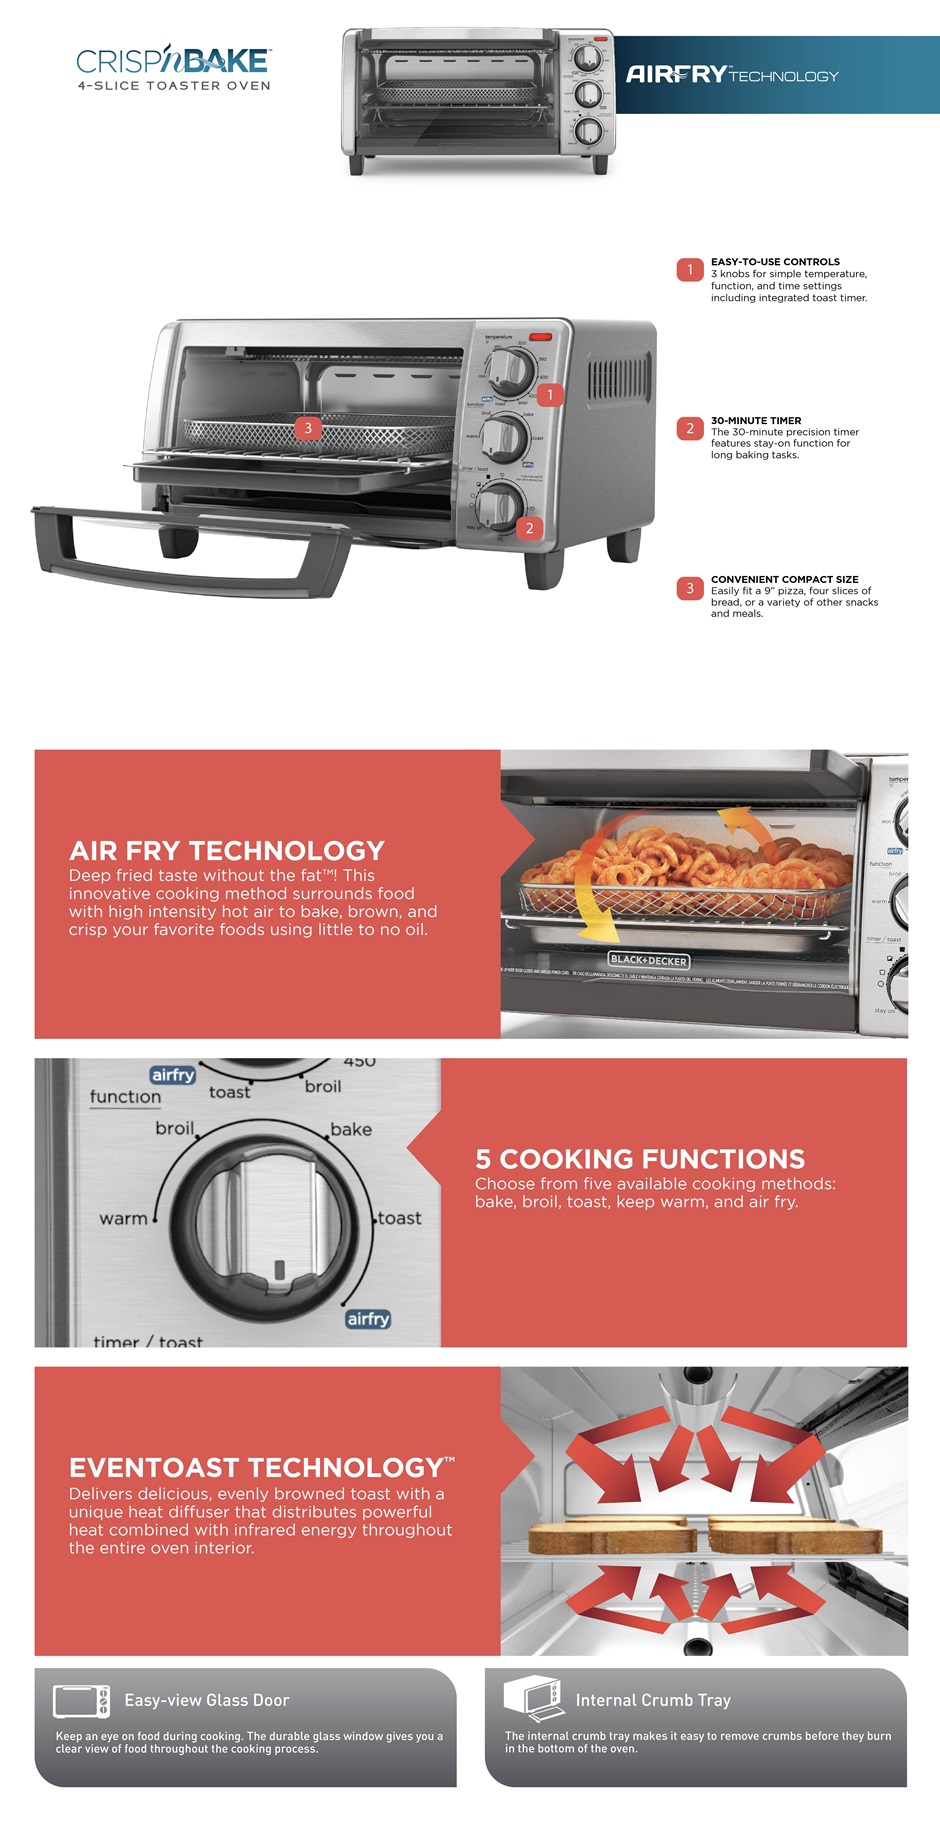 https://s7cdn.spectrumbrands.com/~/media/SmallAppliancesUS/Black%20and%20Decker/Product%20Page/cooking%20appliances/convection%20and%20toaster%20ovens/TO1747SS/TO1747SSG_Digital%20PDP%20Design_OwnedSite_EN01.jpg?h=1821&la=en&mw=940&w=940